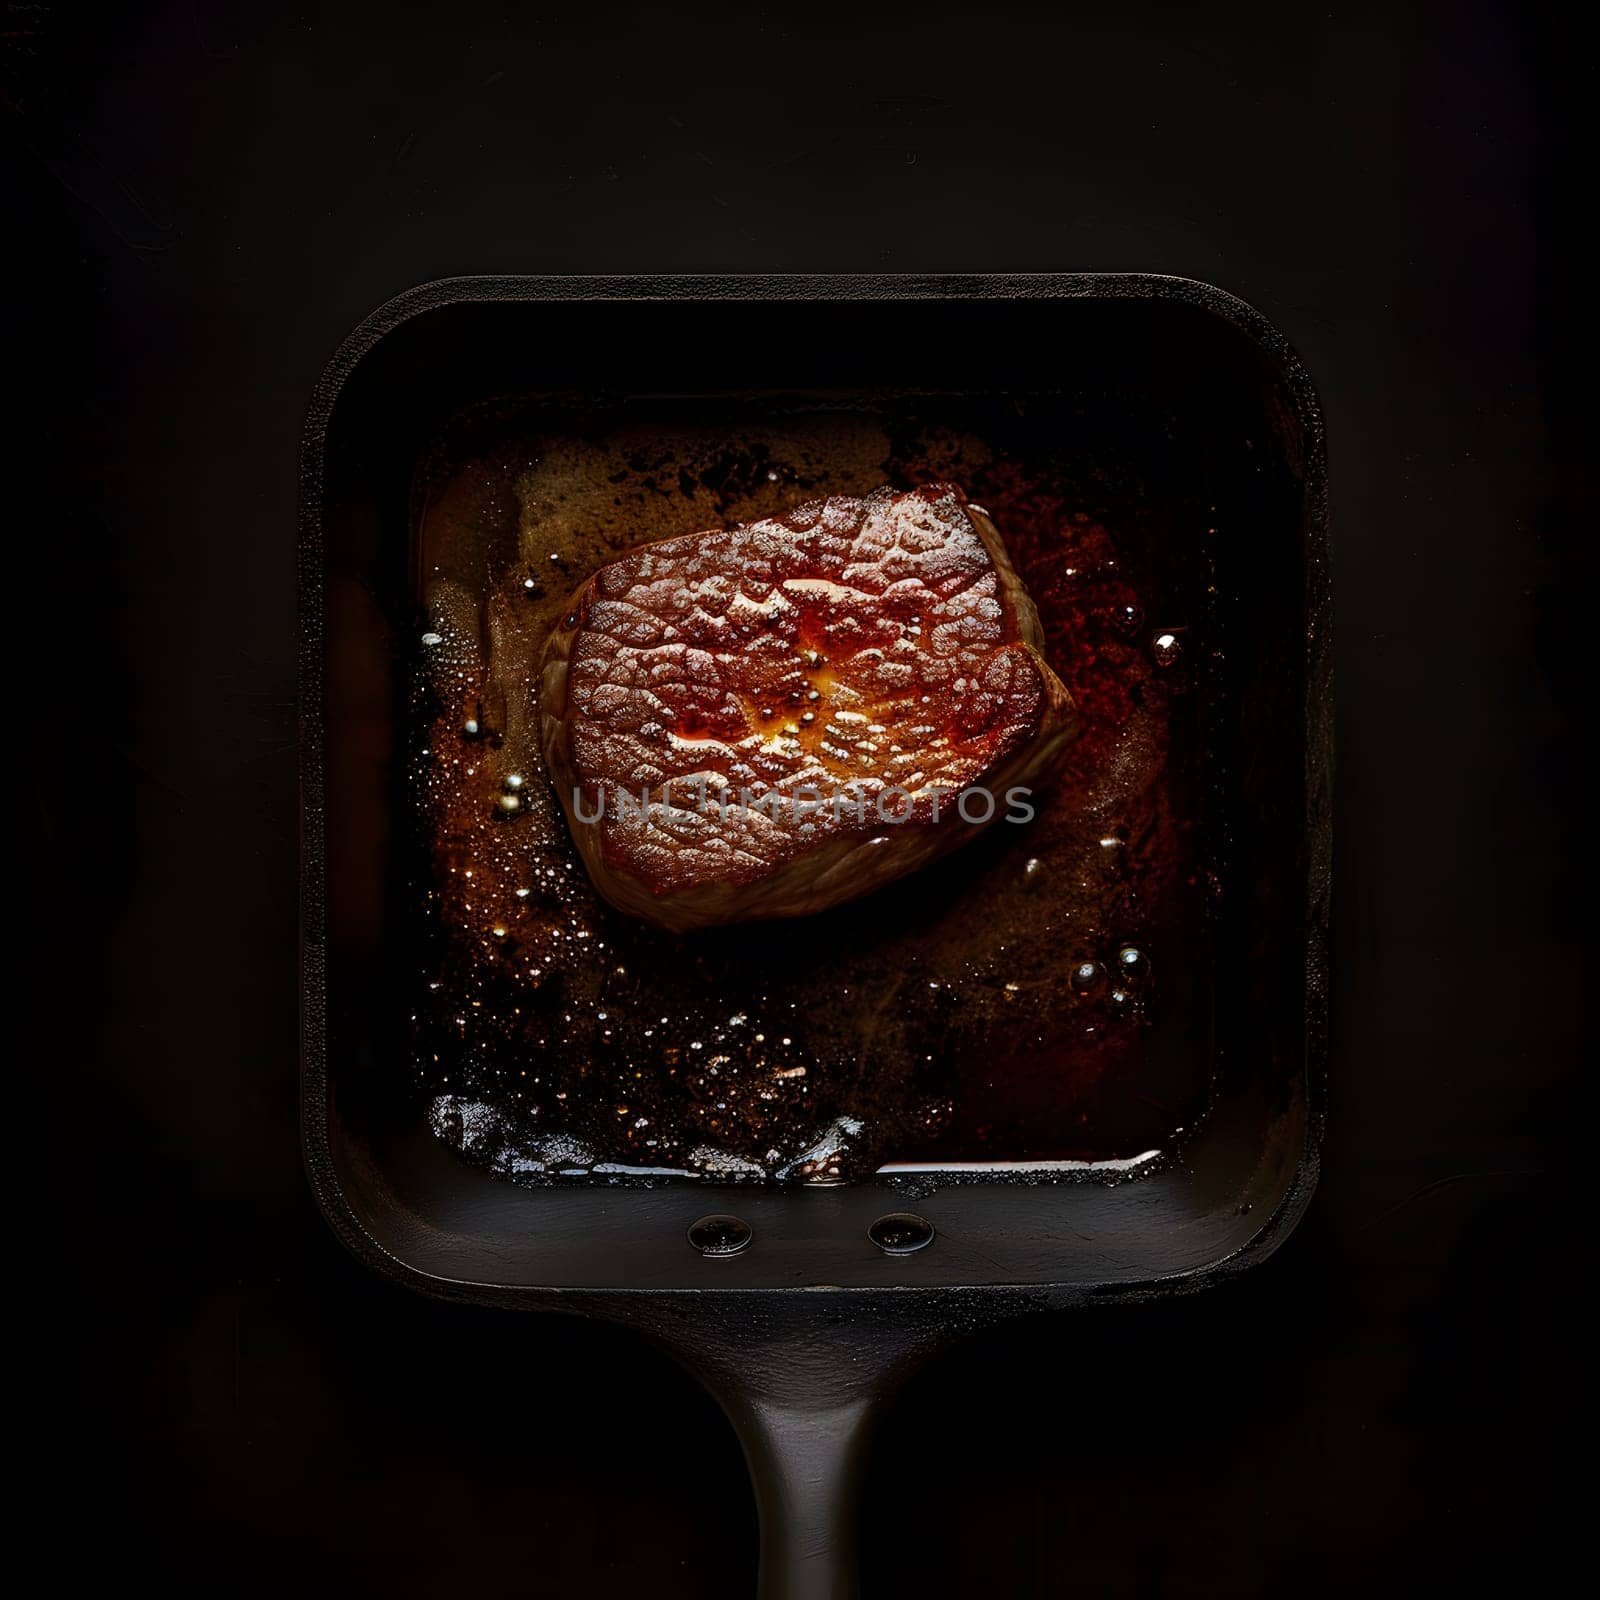 A food event is happening in darkness as a large piece of meat sizzles in a skillet, cooking with gas. The recipe calls for various ingredients and cookware